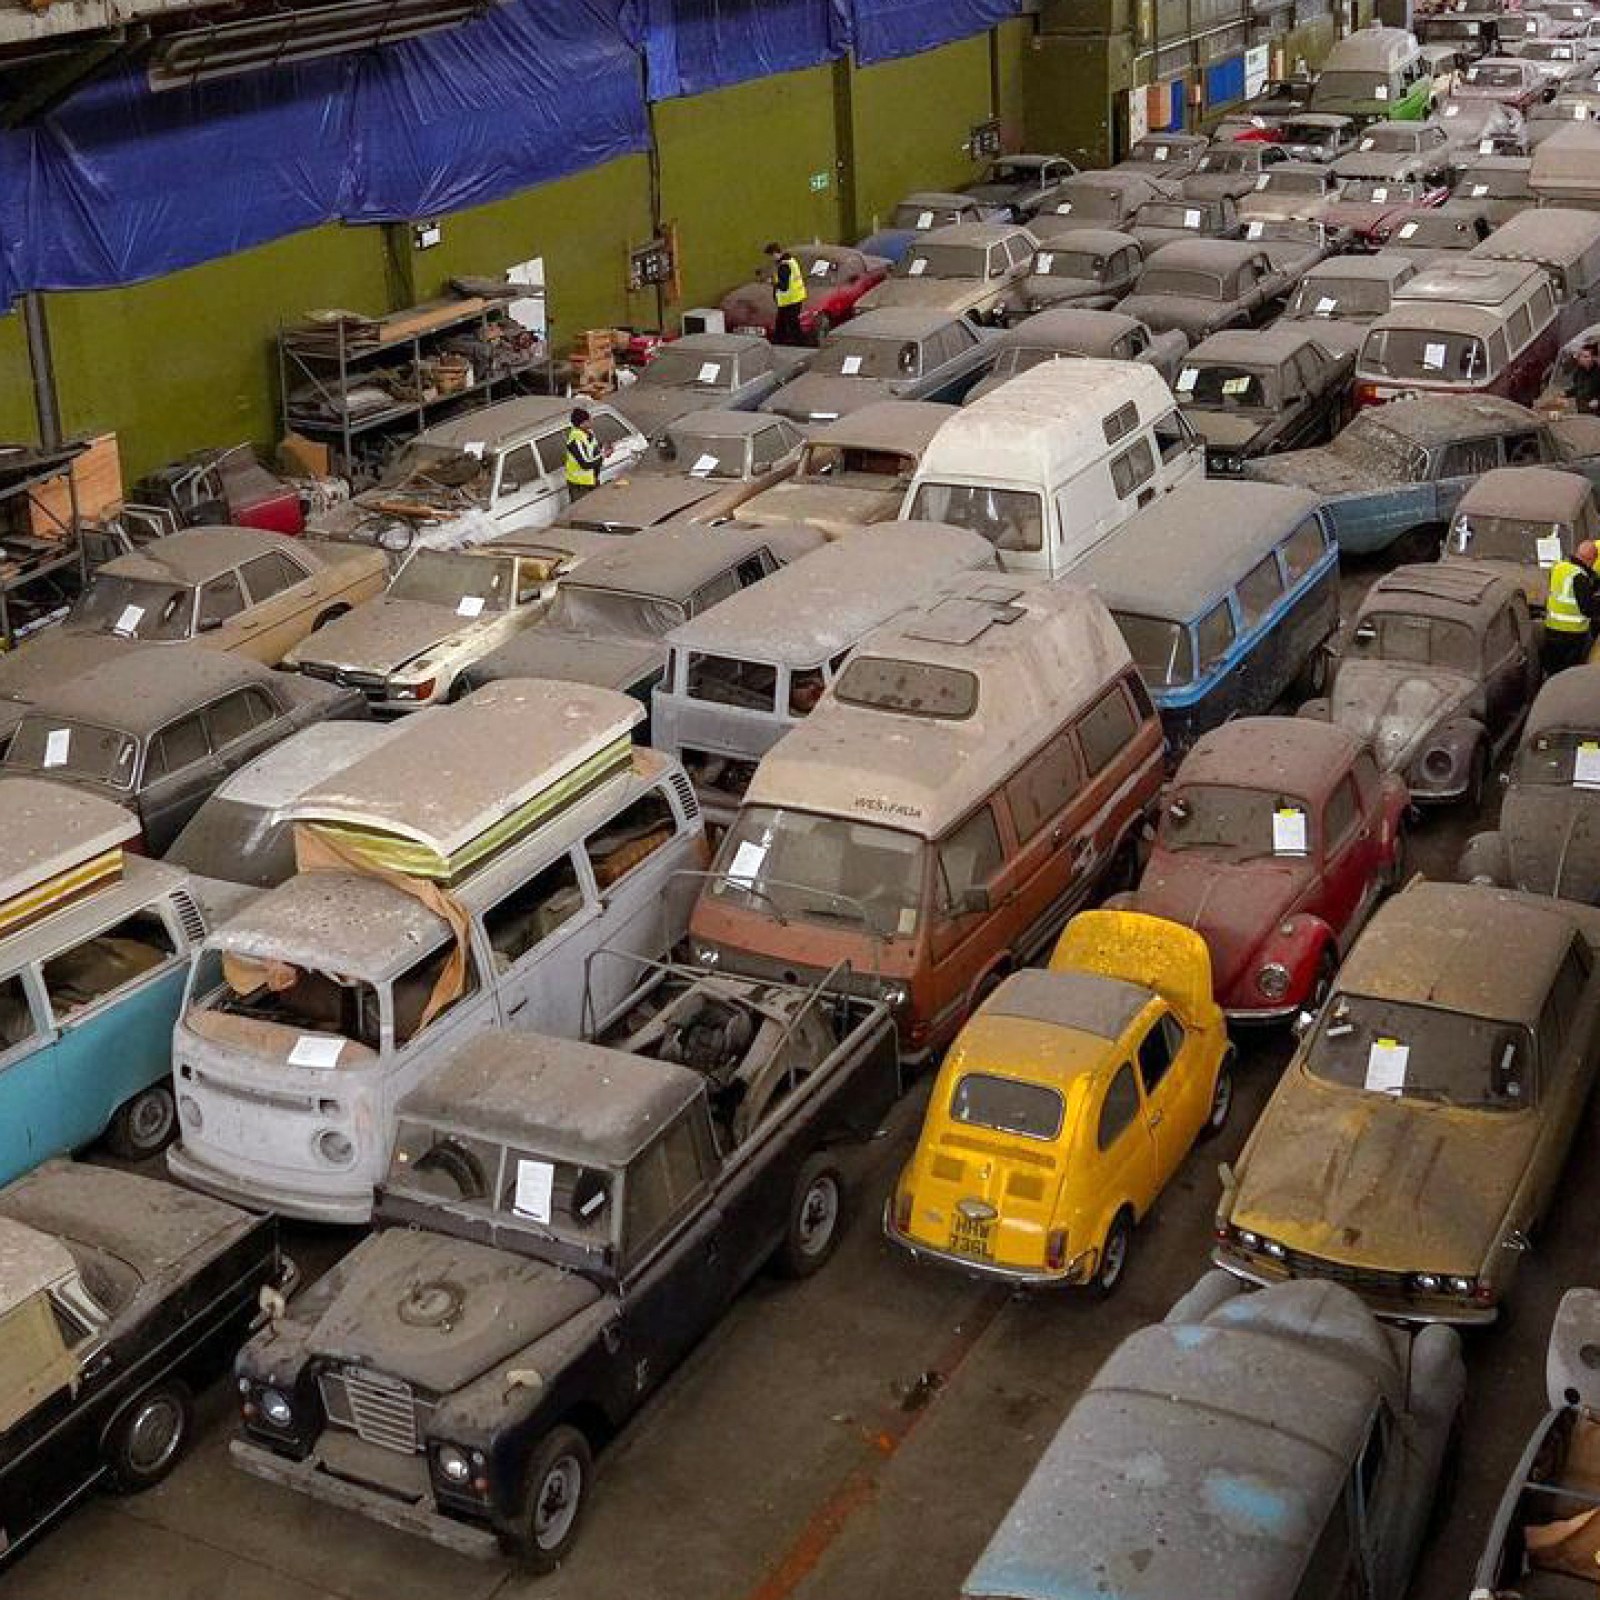 174 Long-Forgotten, Dust-Covered Classic Cars Found Sitting in a